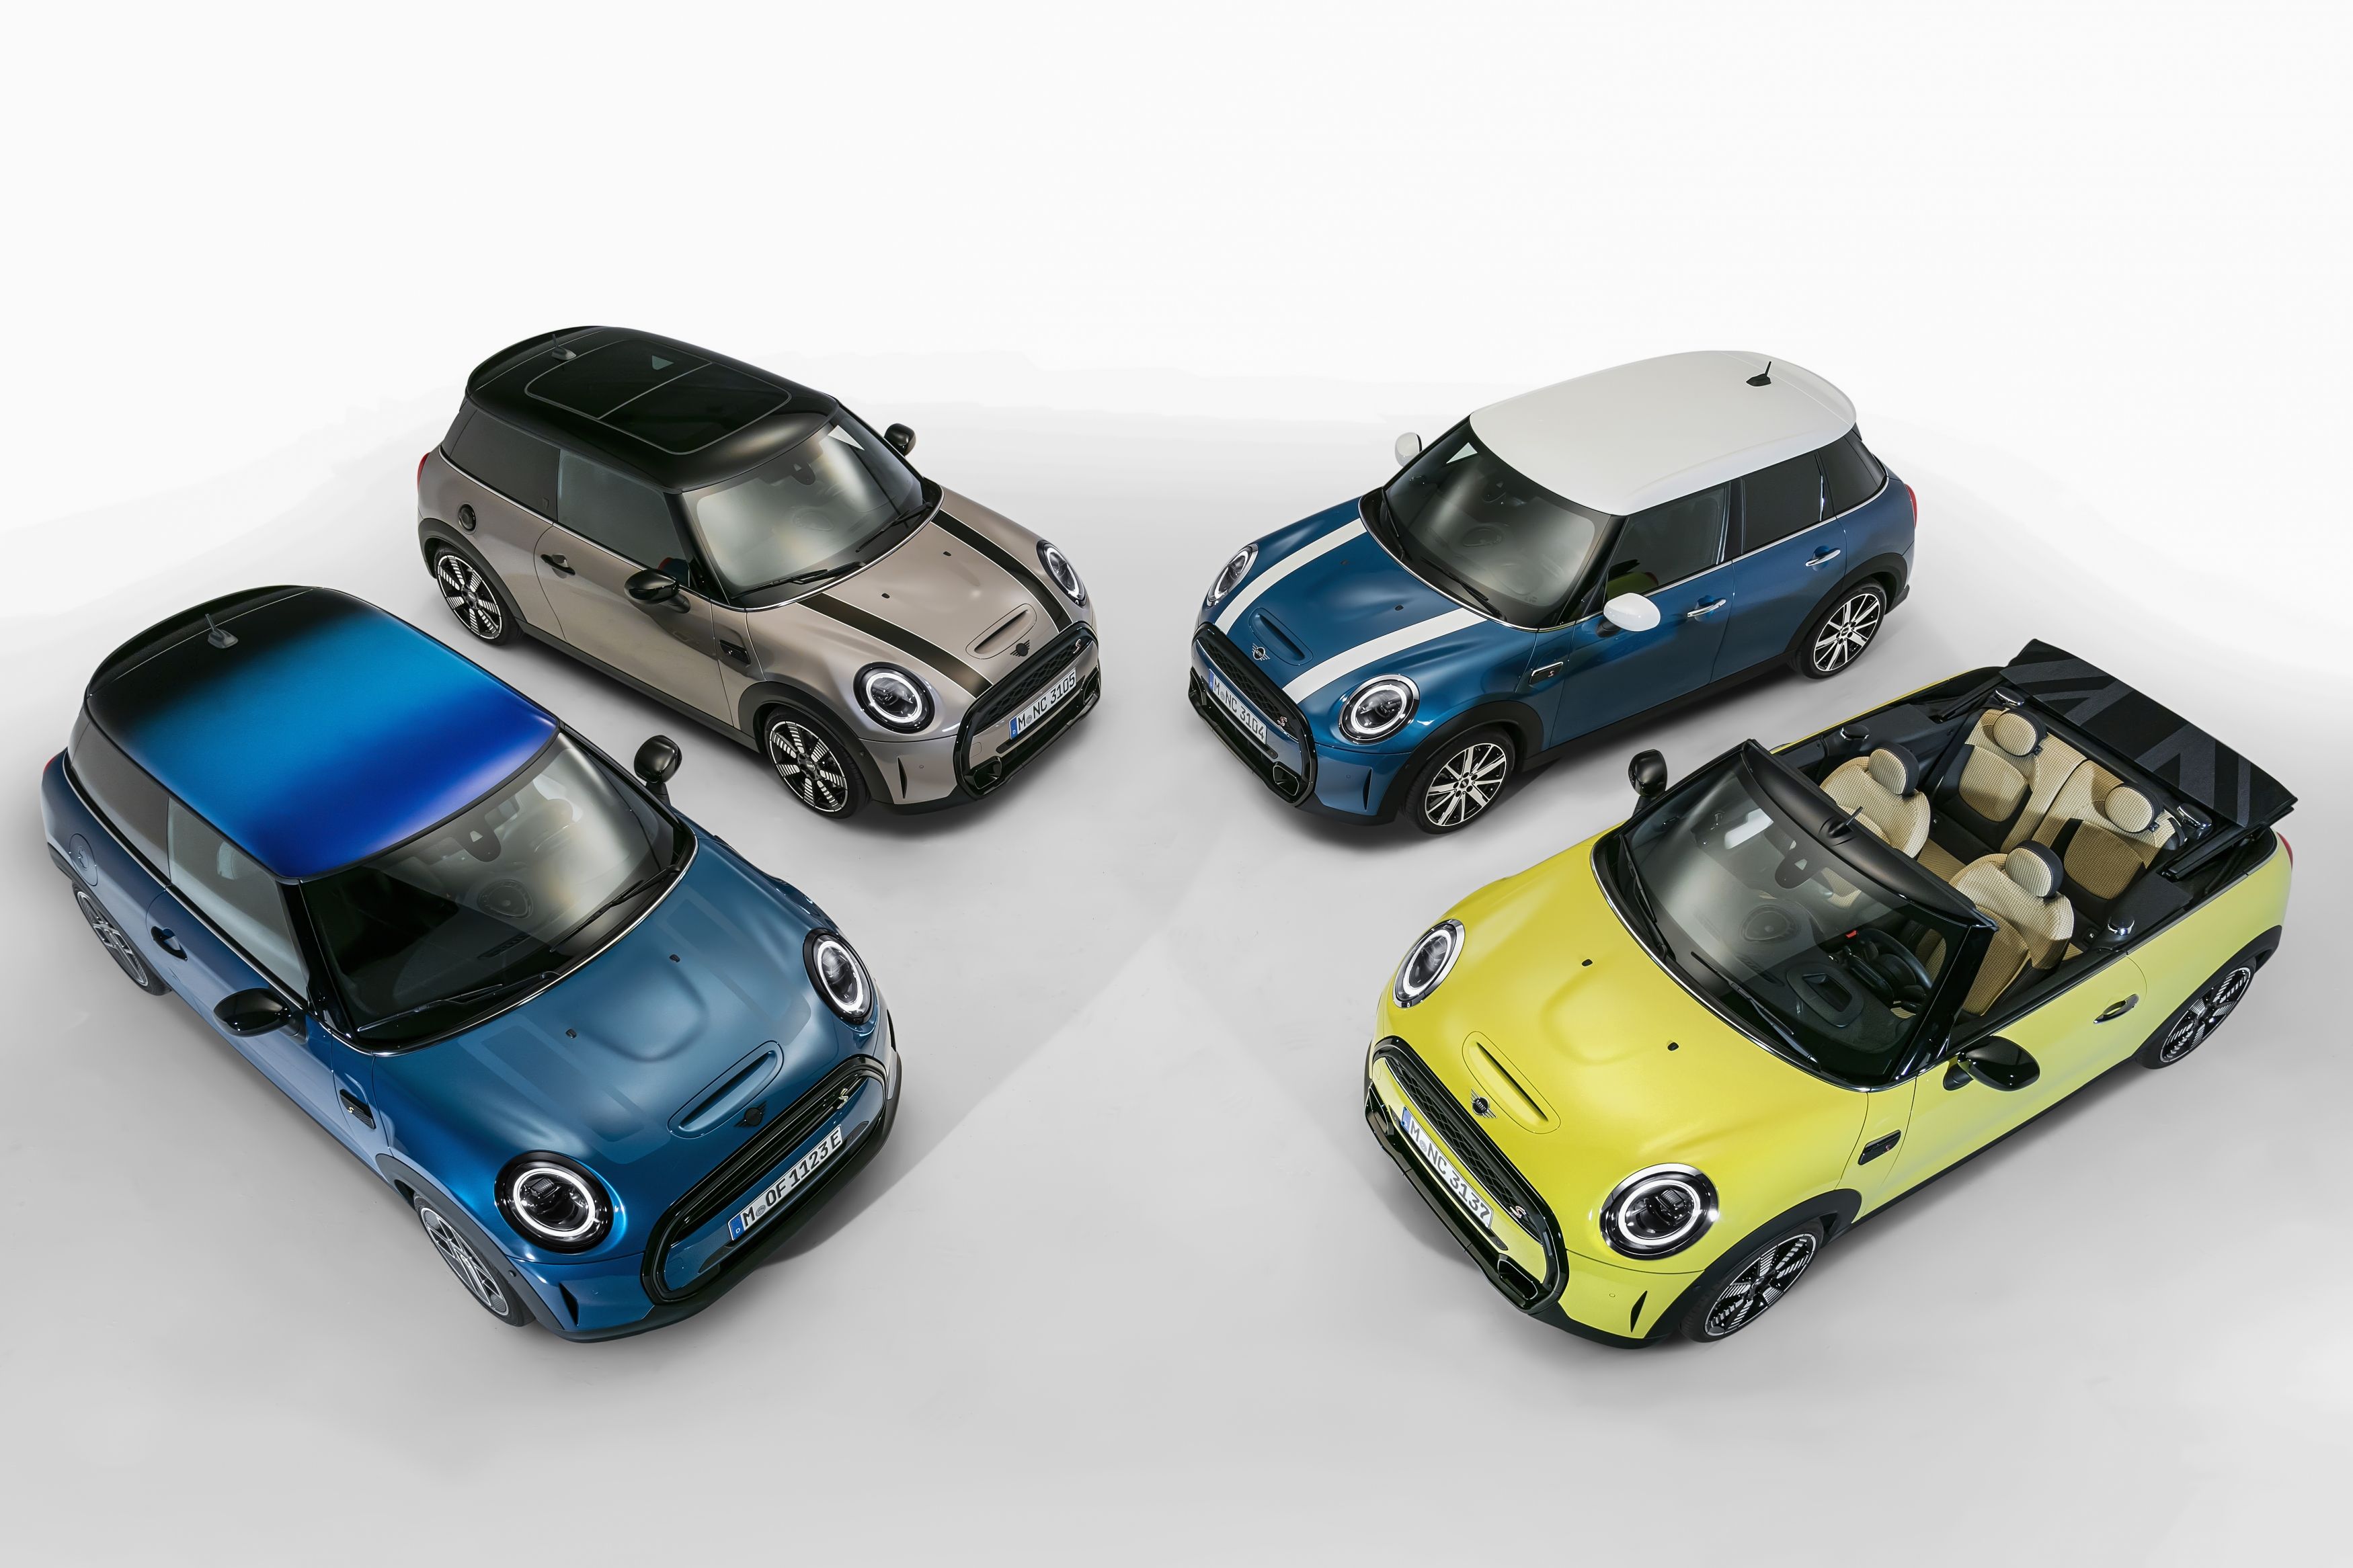 NEW LOOK: The  Mini family has had an extensive set of improvements